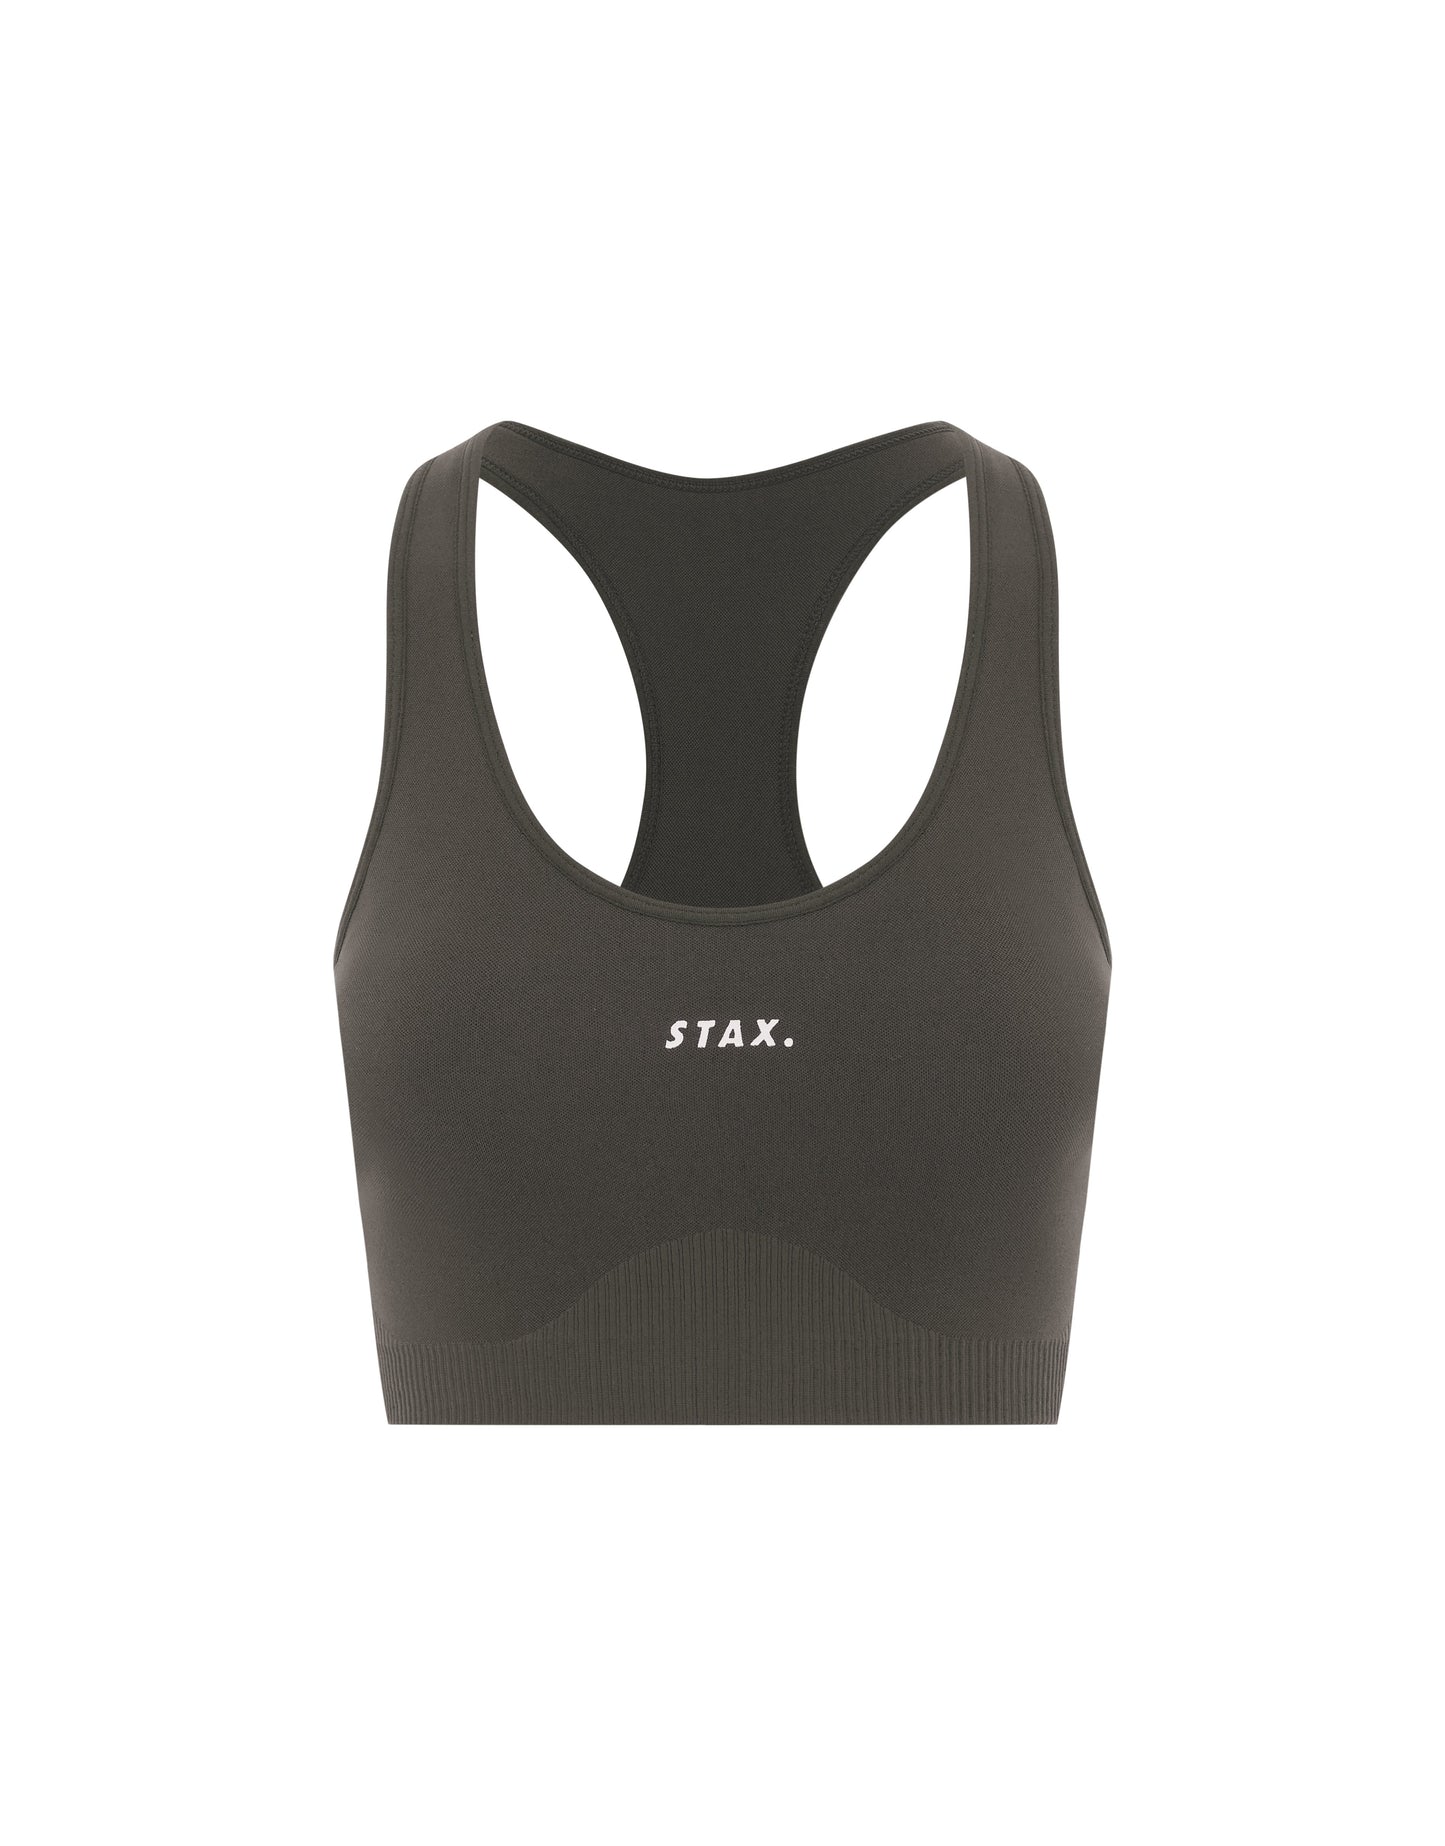 STAX. PSF Racer Crop - Dovetail